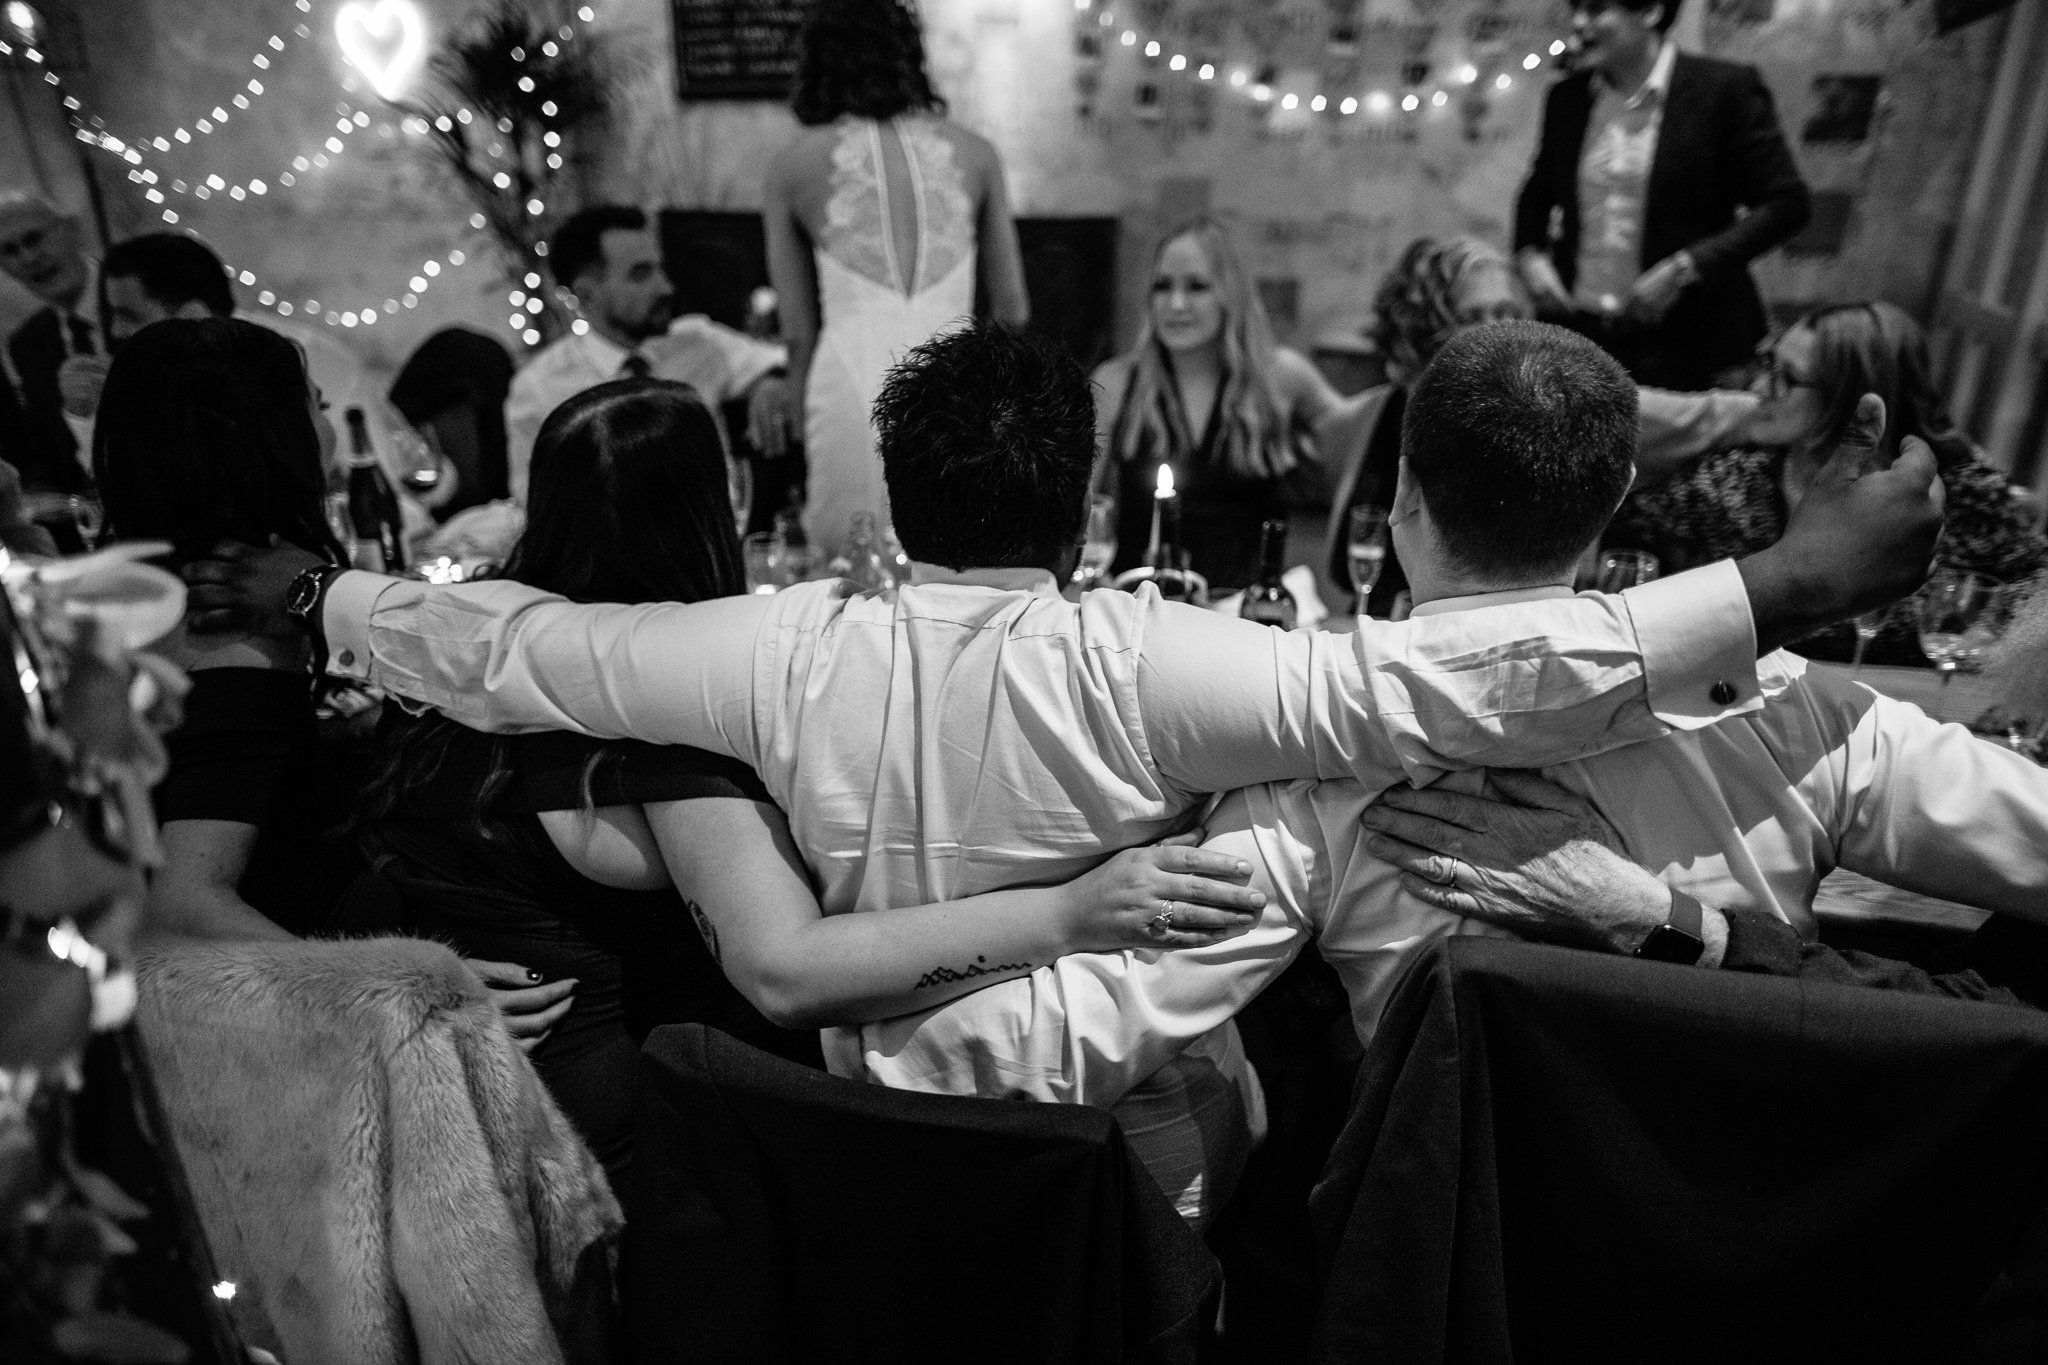  Wedding guests with their arms around each other 